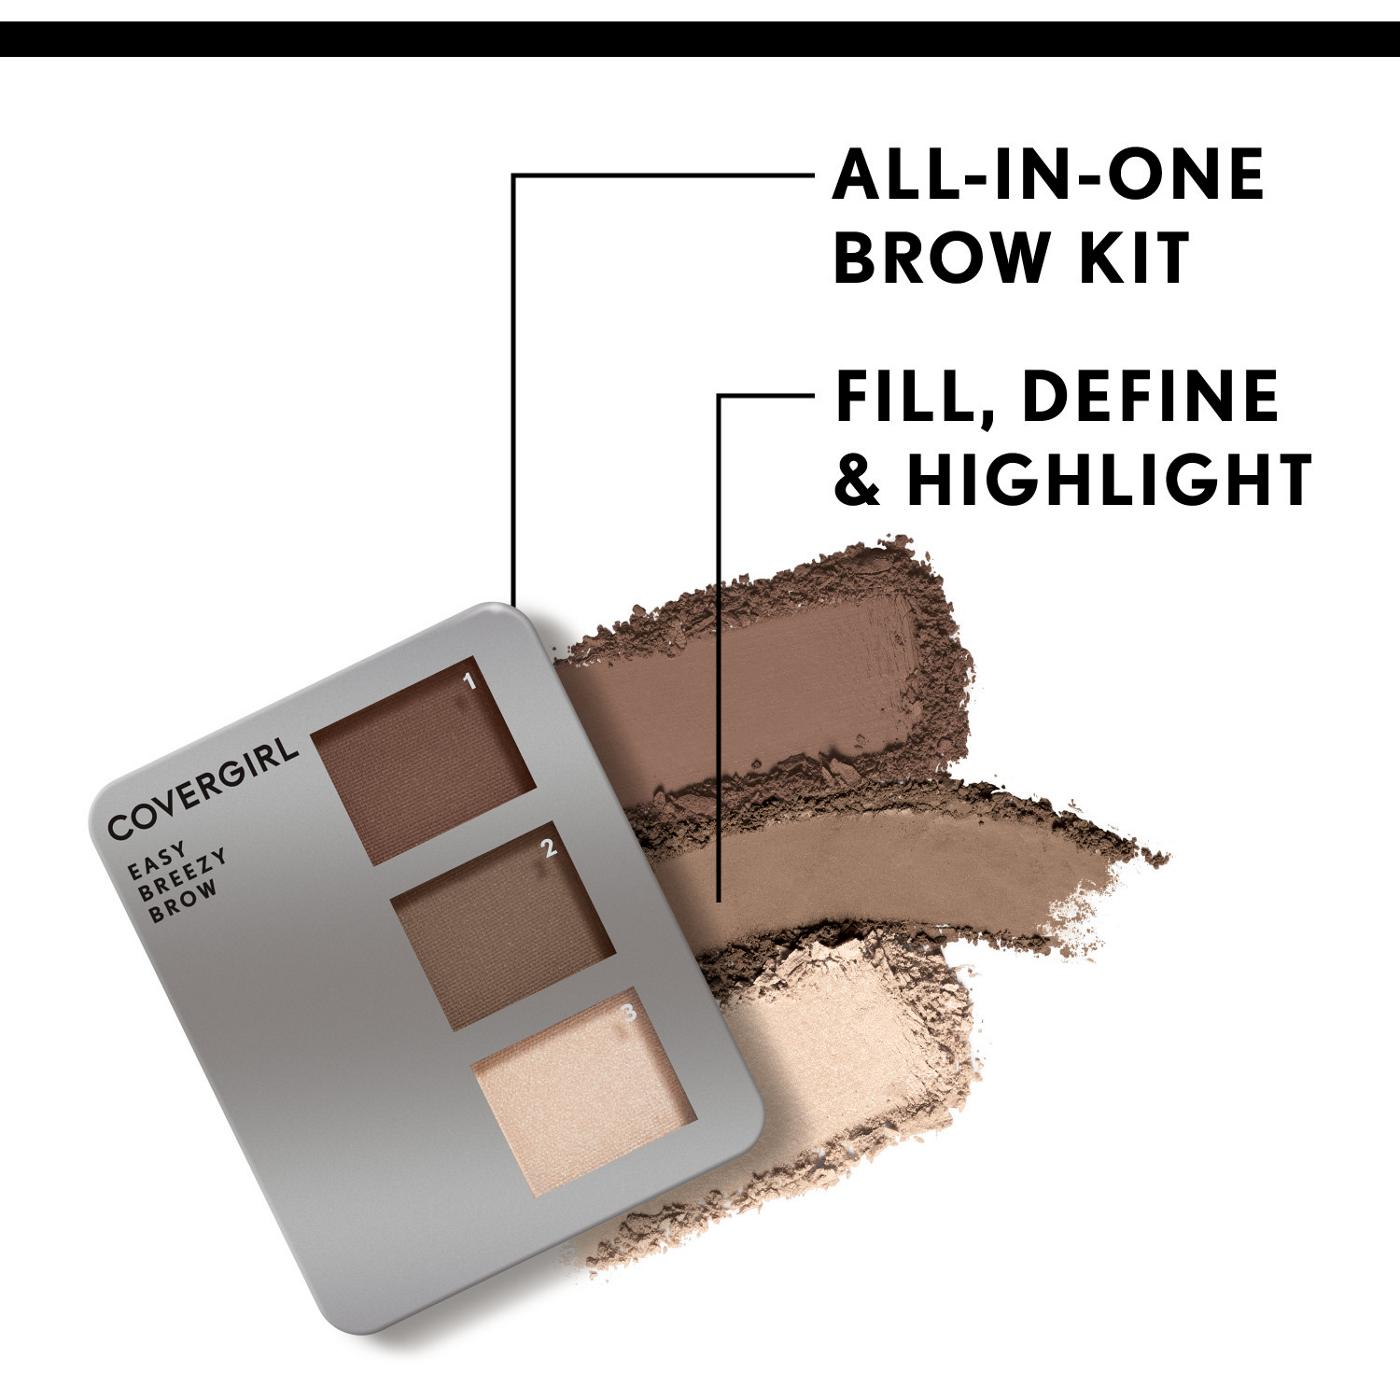 Covergirl Easy Breezy Brow Powder Kit 720 Soft Blonde; image 2 of 7